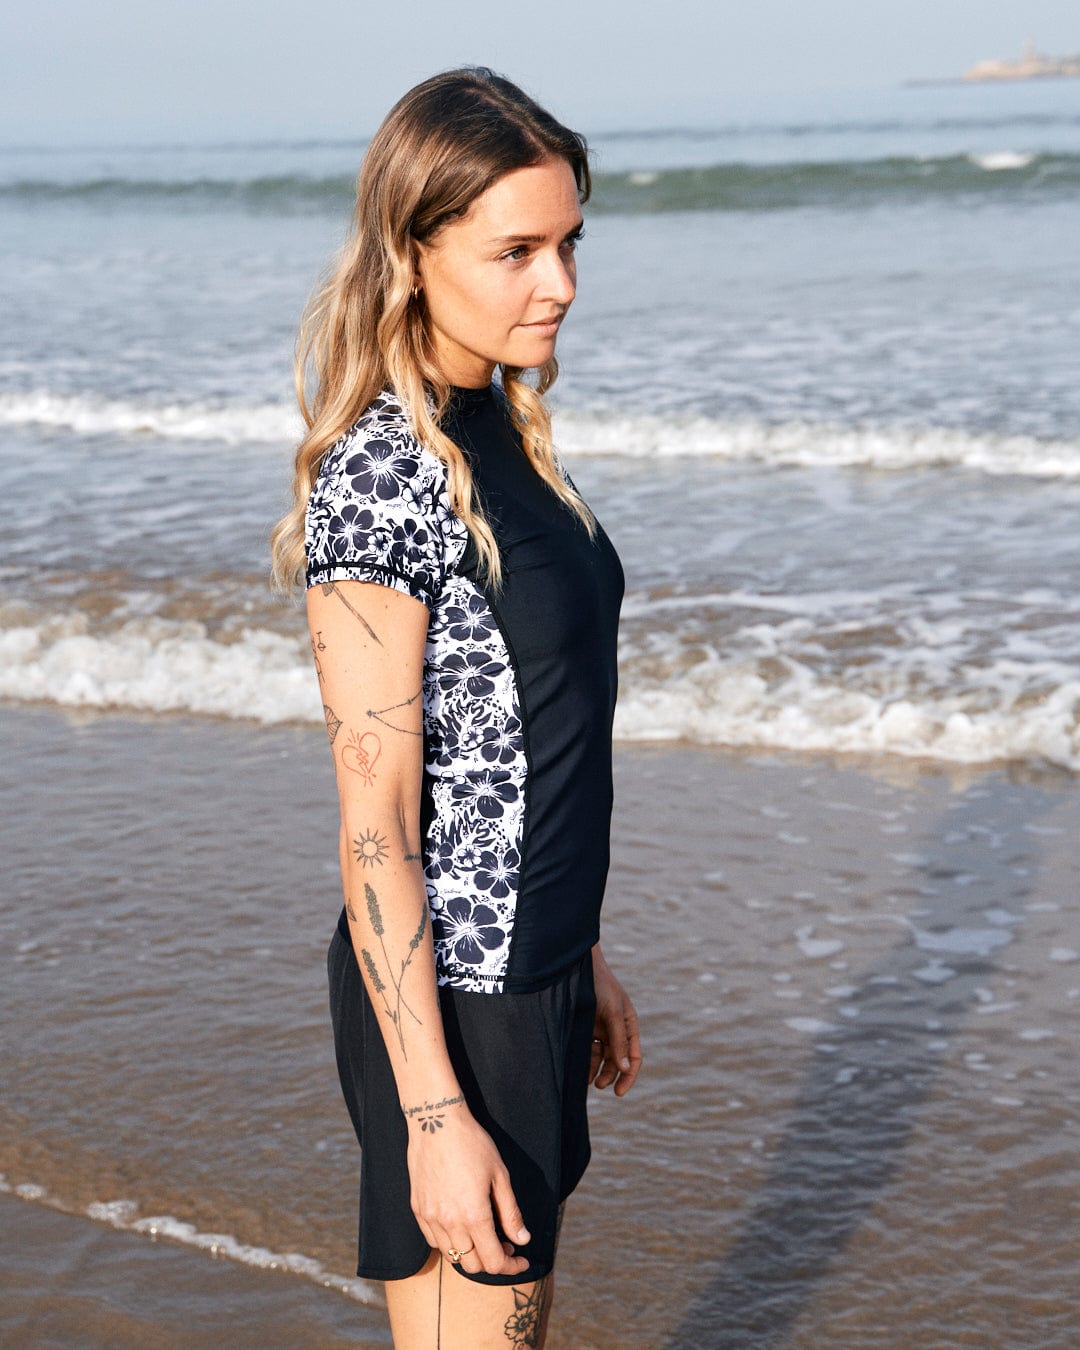 A woman with tattoos stands on a beach, wearing a blue and white rash guard featuring the Saltrock Hibiscus - Recycled Womens Short Sleeve Rashvest - Black, looking sideways with the ocean in the background.